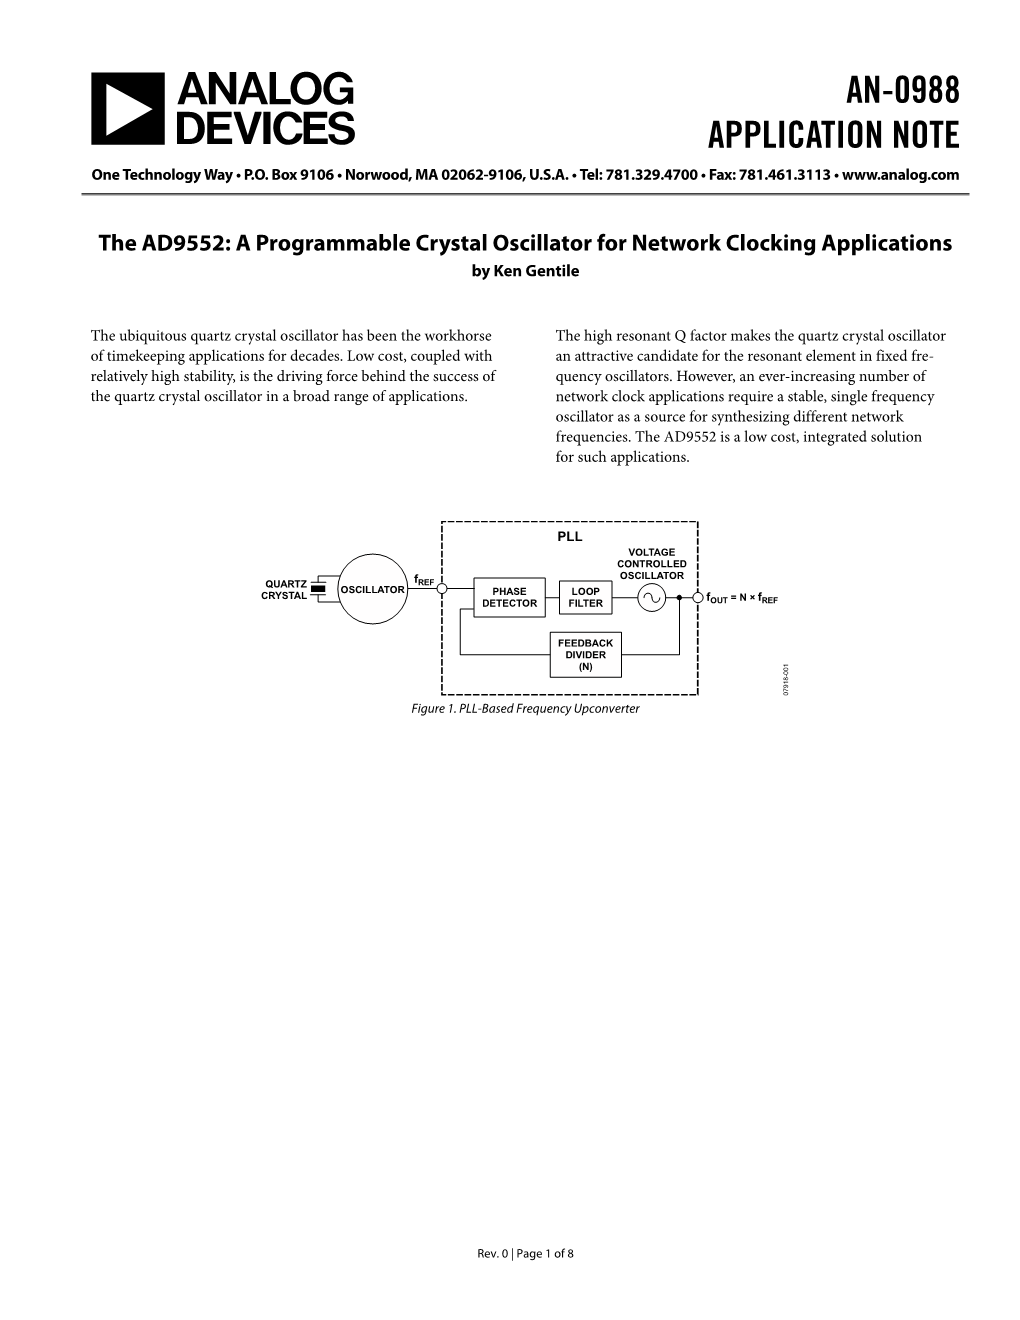 A Programmable Crystal Oscillator for Network Clocking Applications by Ken Gentile